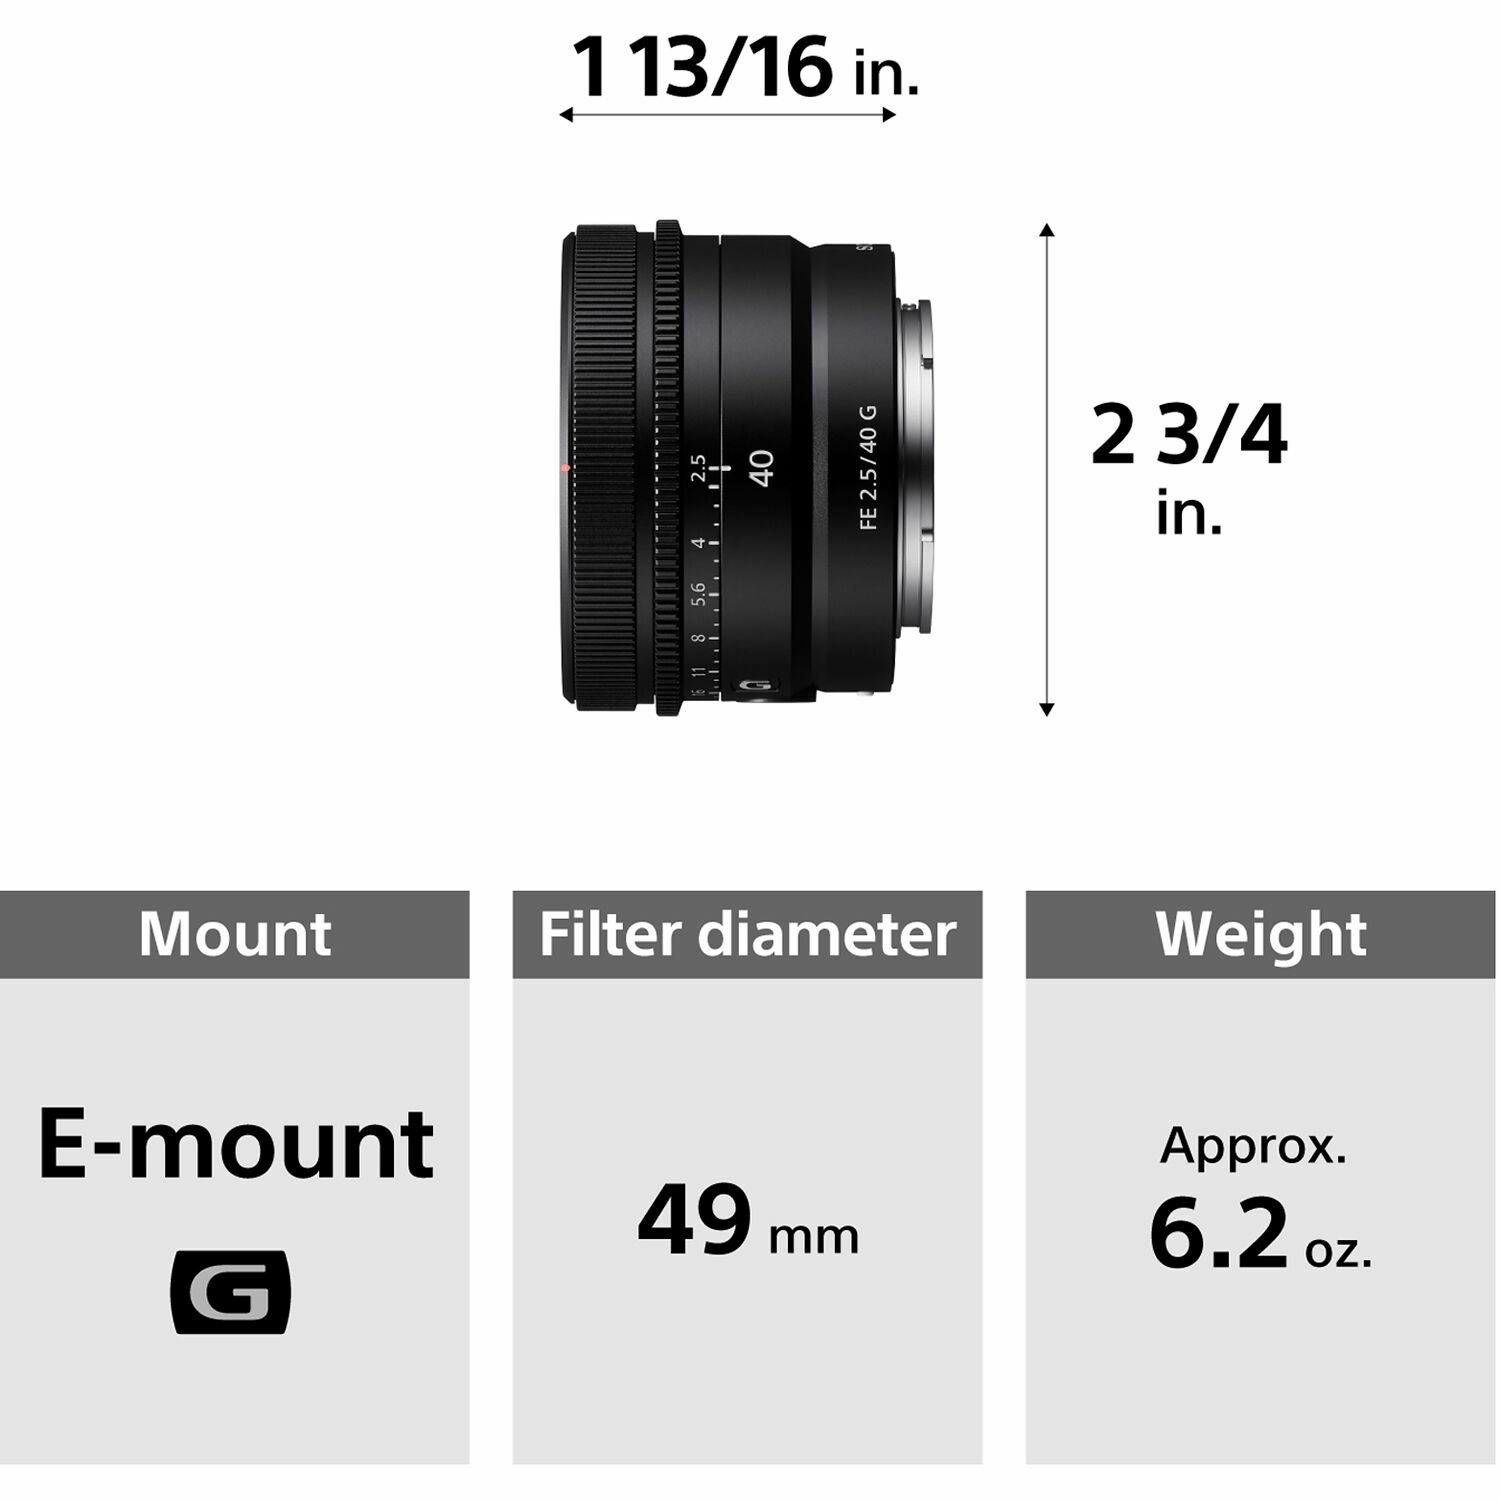 Sony FE 40mm f/2.5 G objektiv za E-Mount SEL-40F25G SEL40F25G (SEL40F25G.SYX)